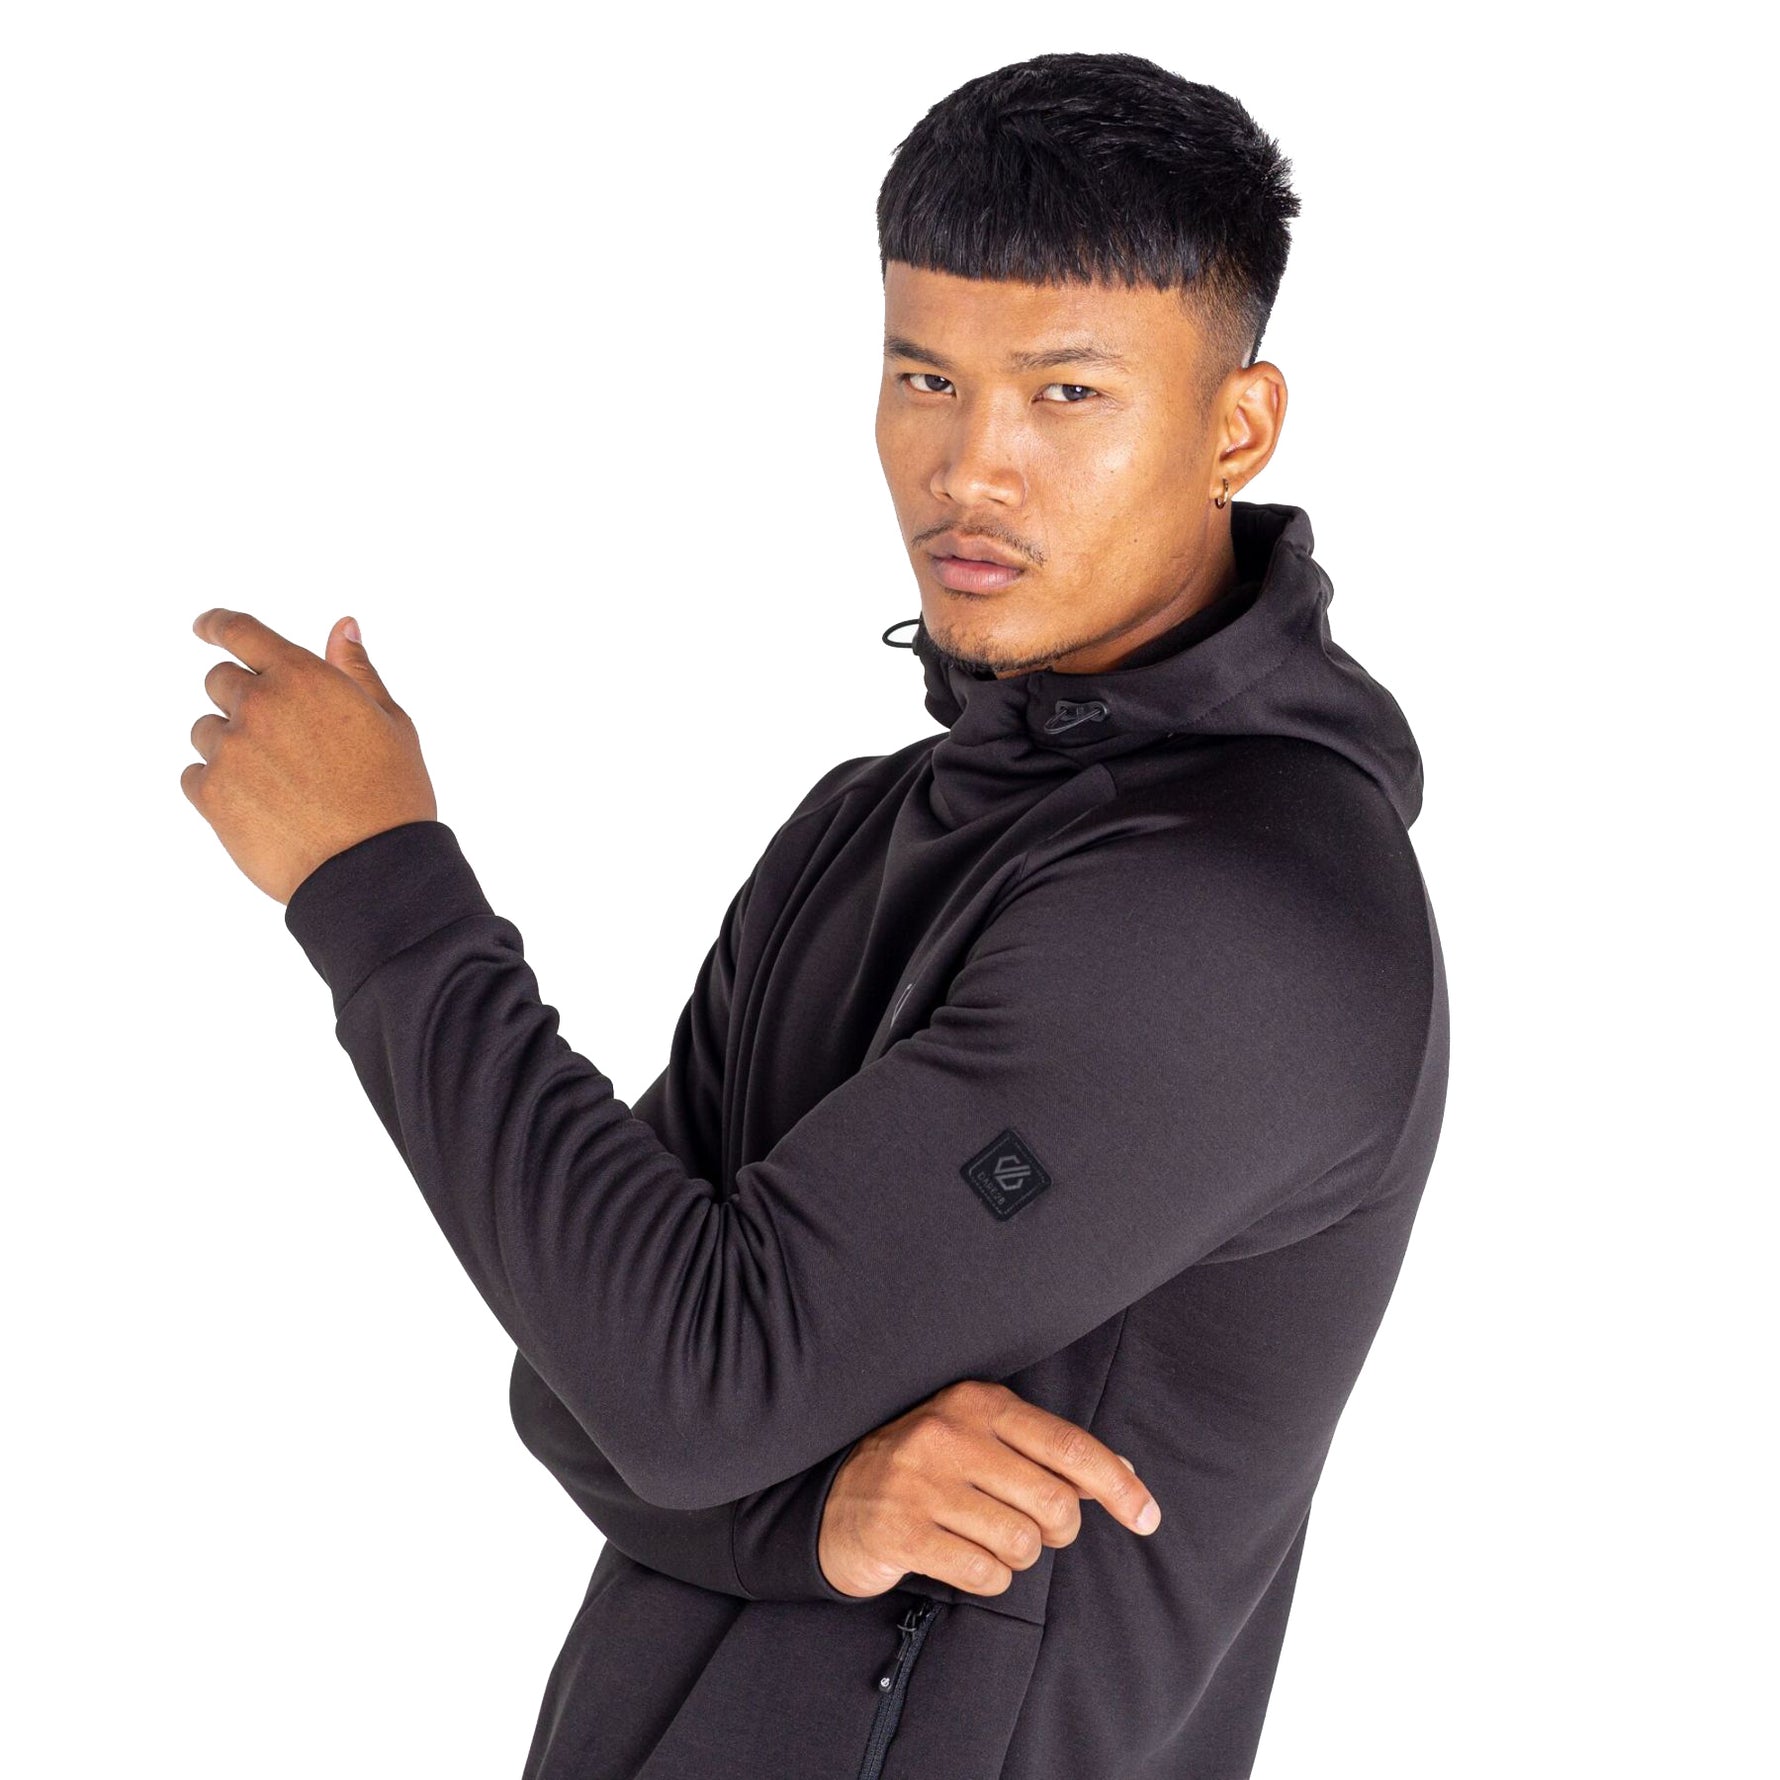 Dare2B Men's Out Calling Overhead Tech Hoodie 